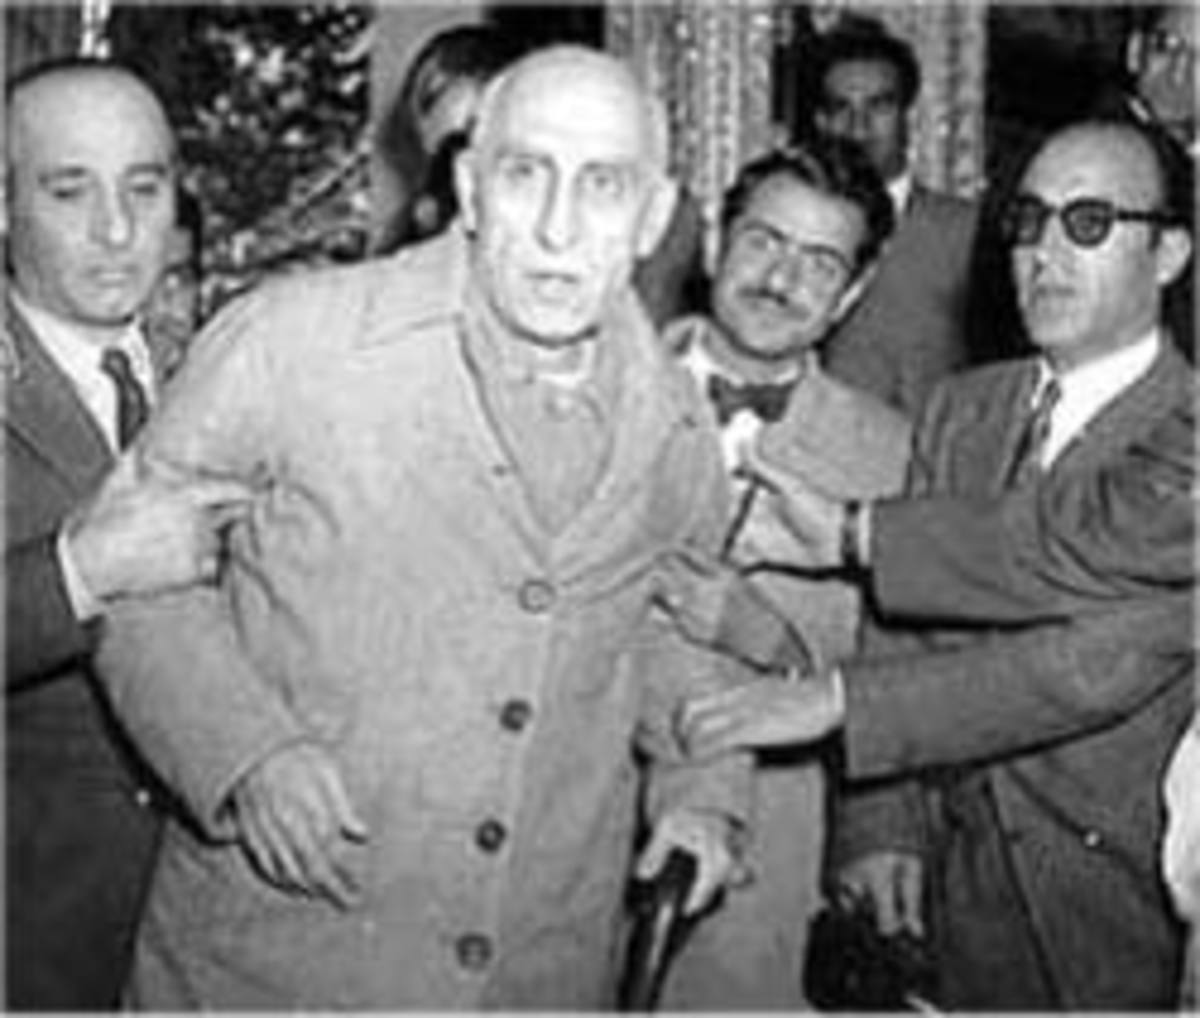 Mohammed Mossadegh being led away after the coup.